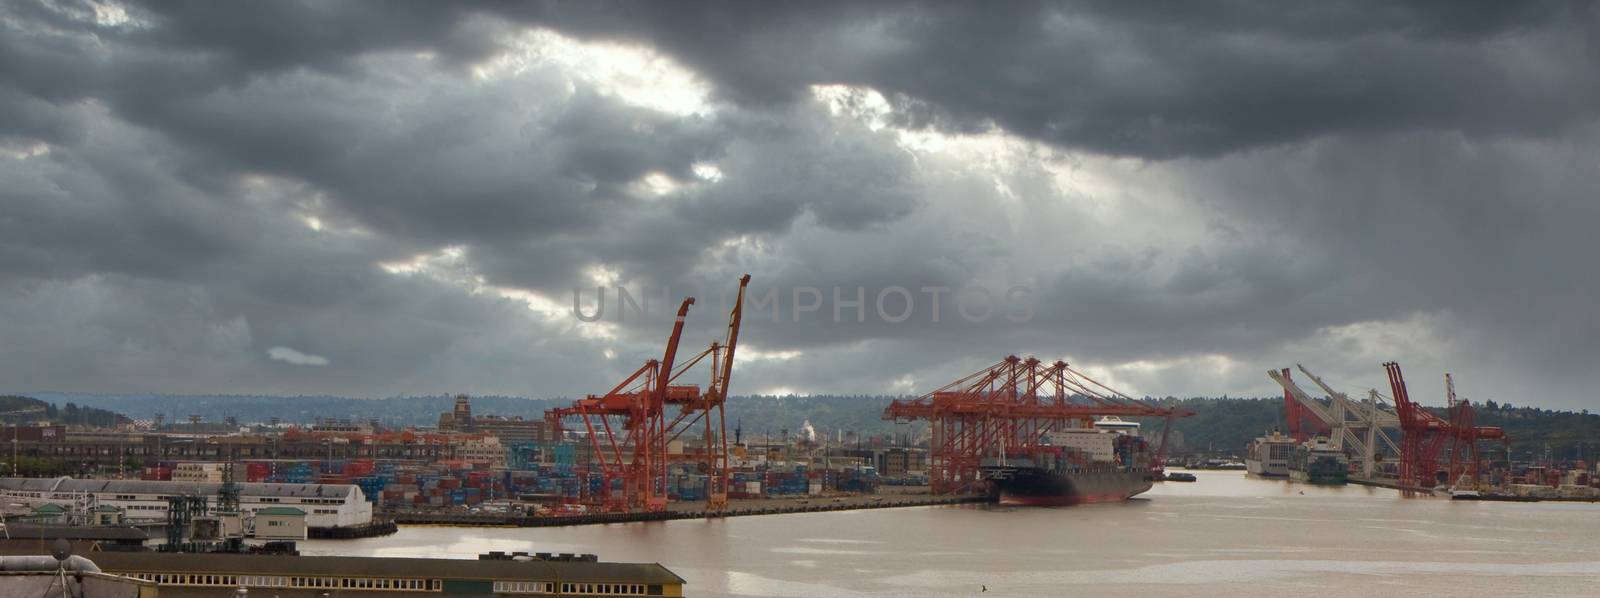 Port of Seattle Under Storm Clouds by dbvirago